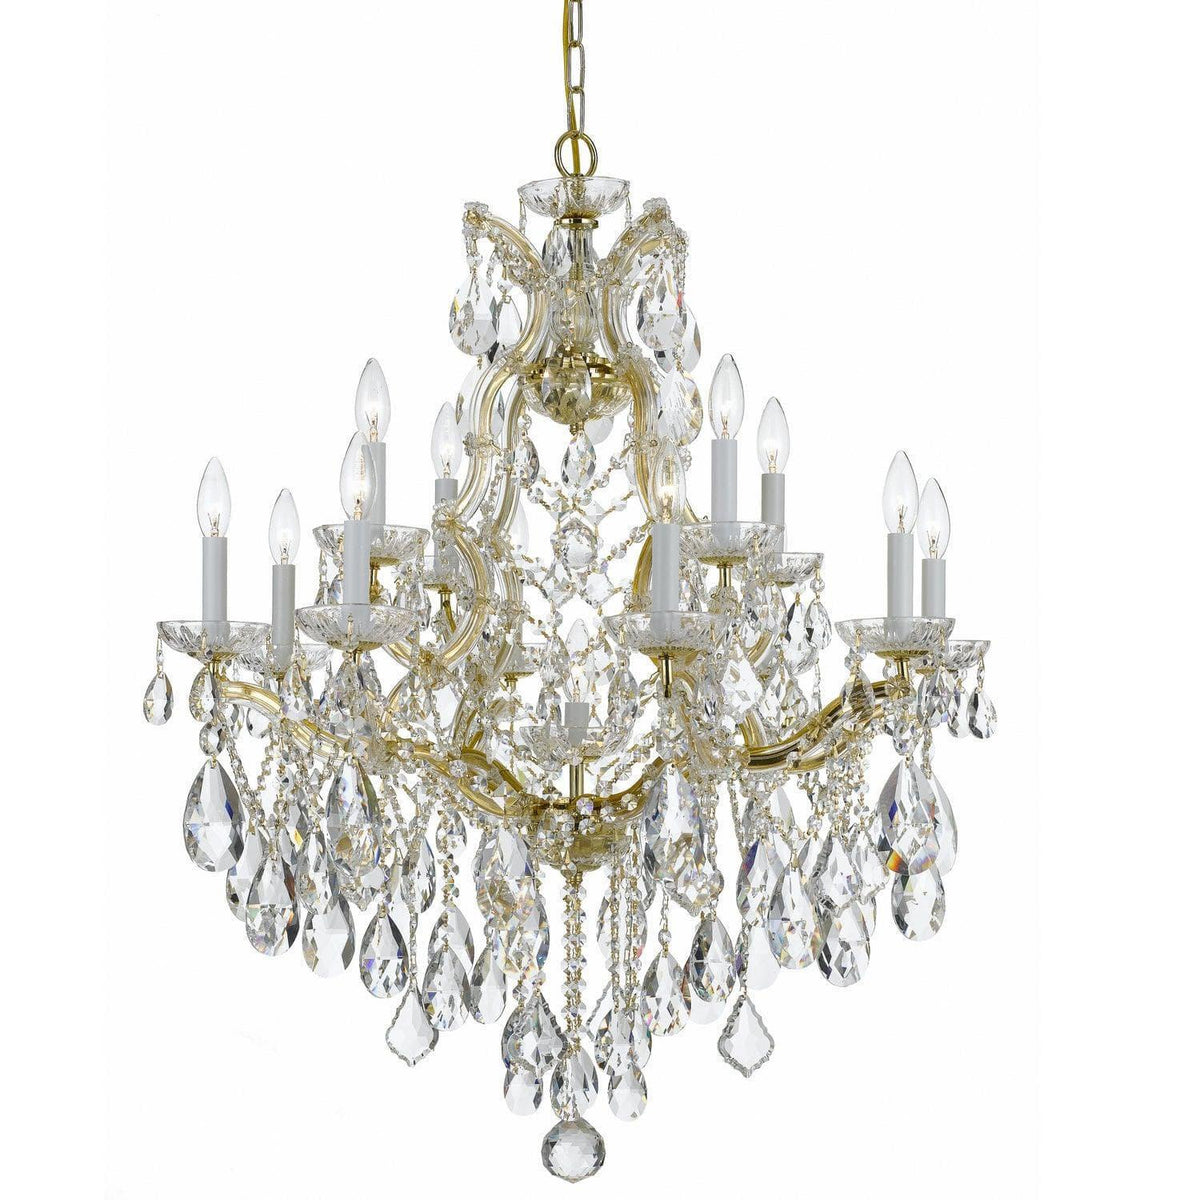 Crystorama - Maria Theresa Chandelier - 4413-GD-CL-MWP | Montreal Lighting & Hardware